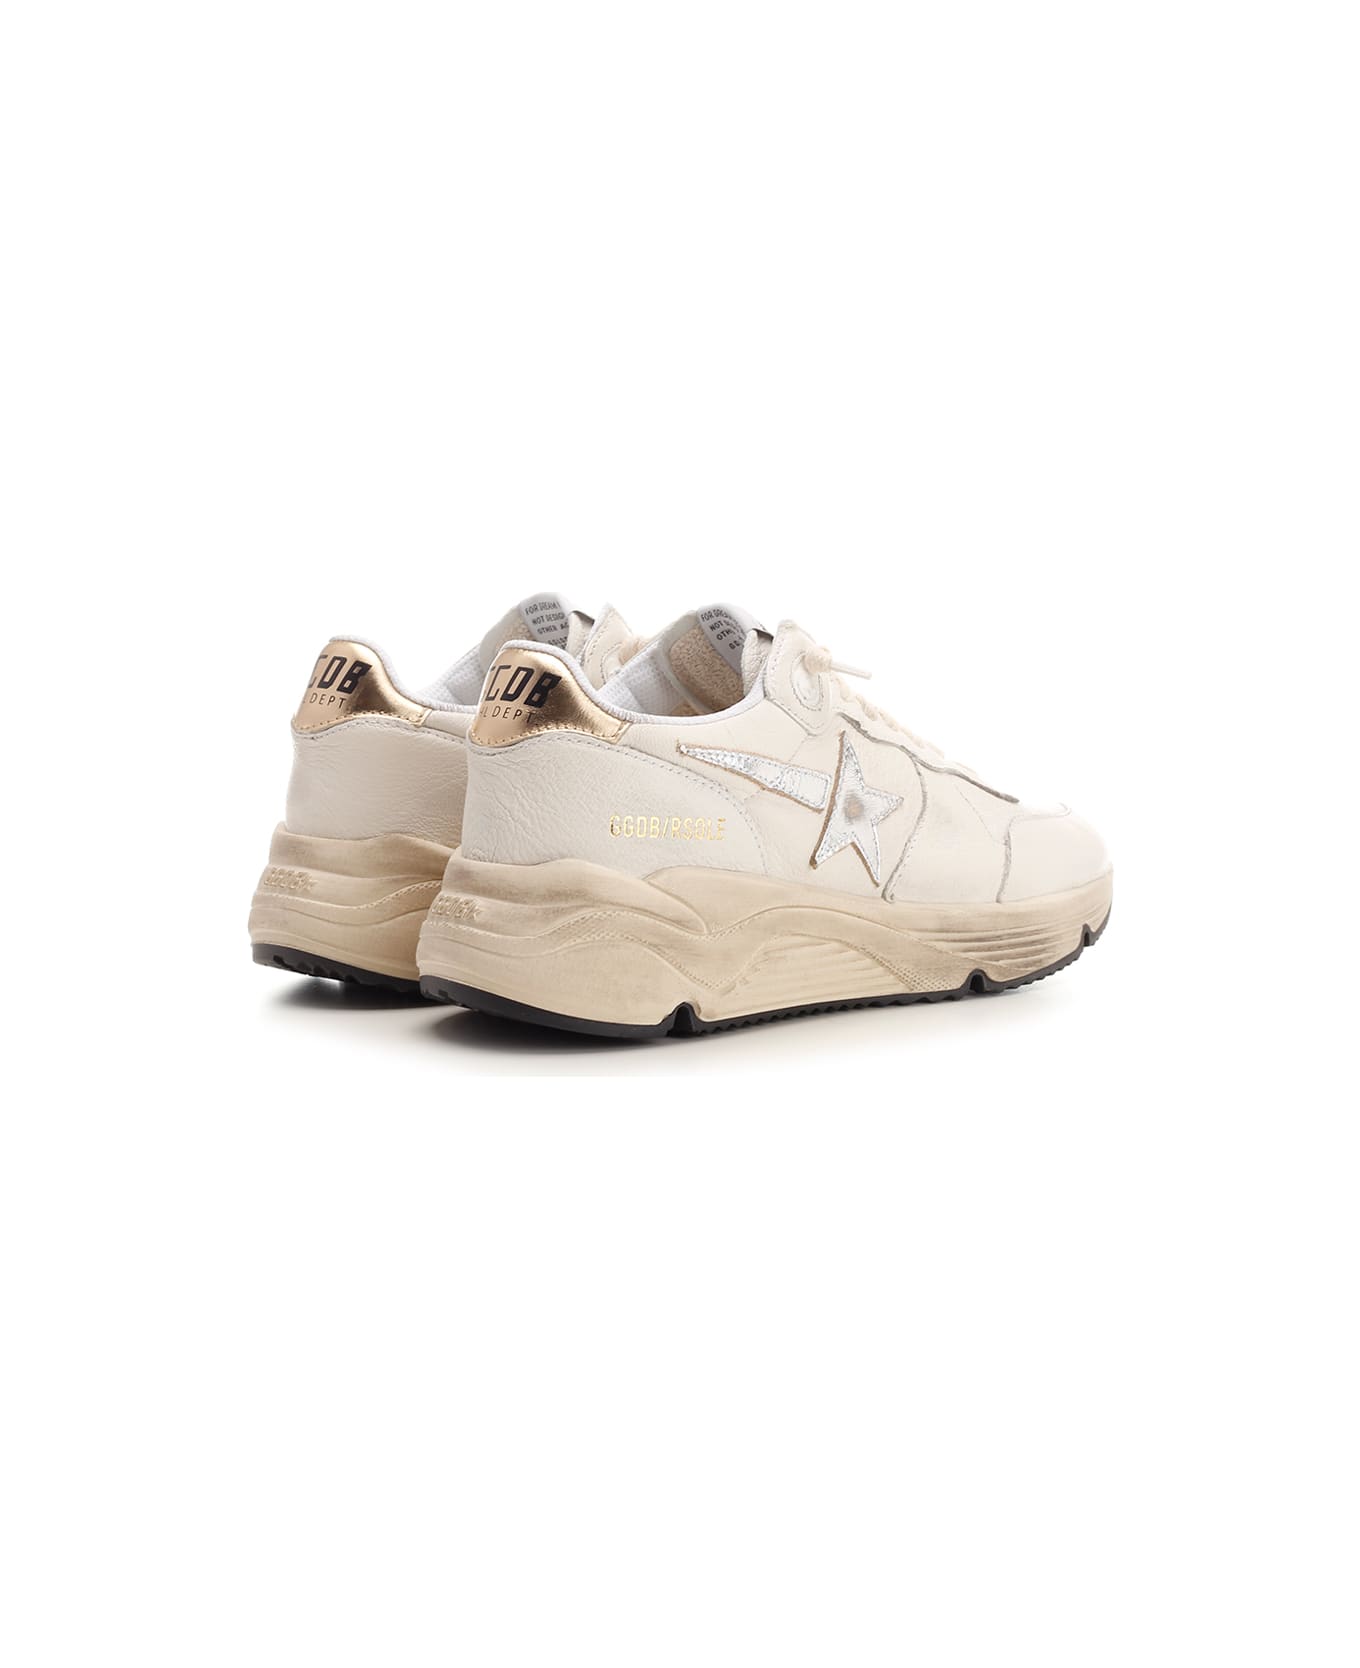 Golden Goose Running Sole Sneakers - White/Silver/Gold